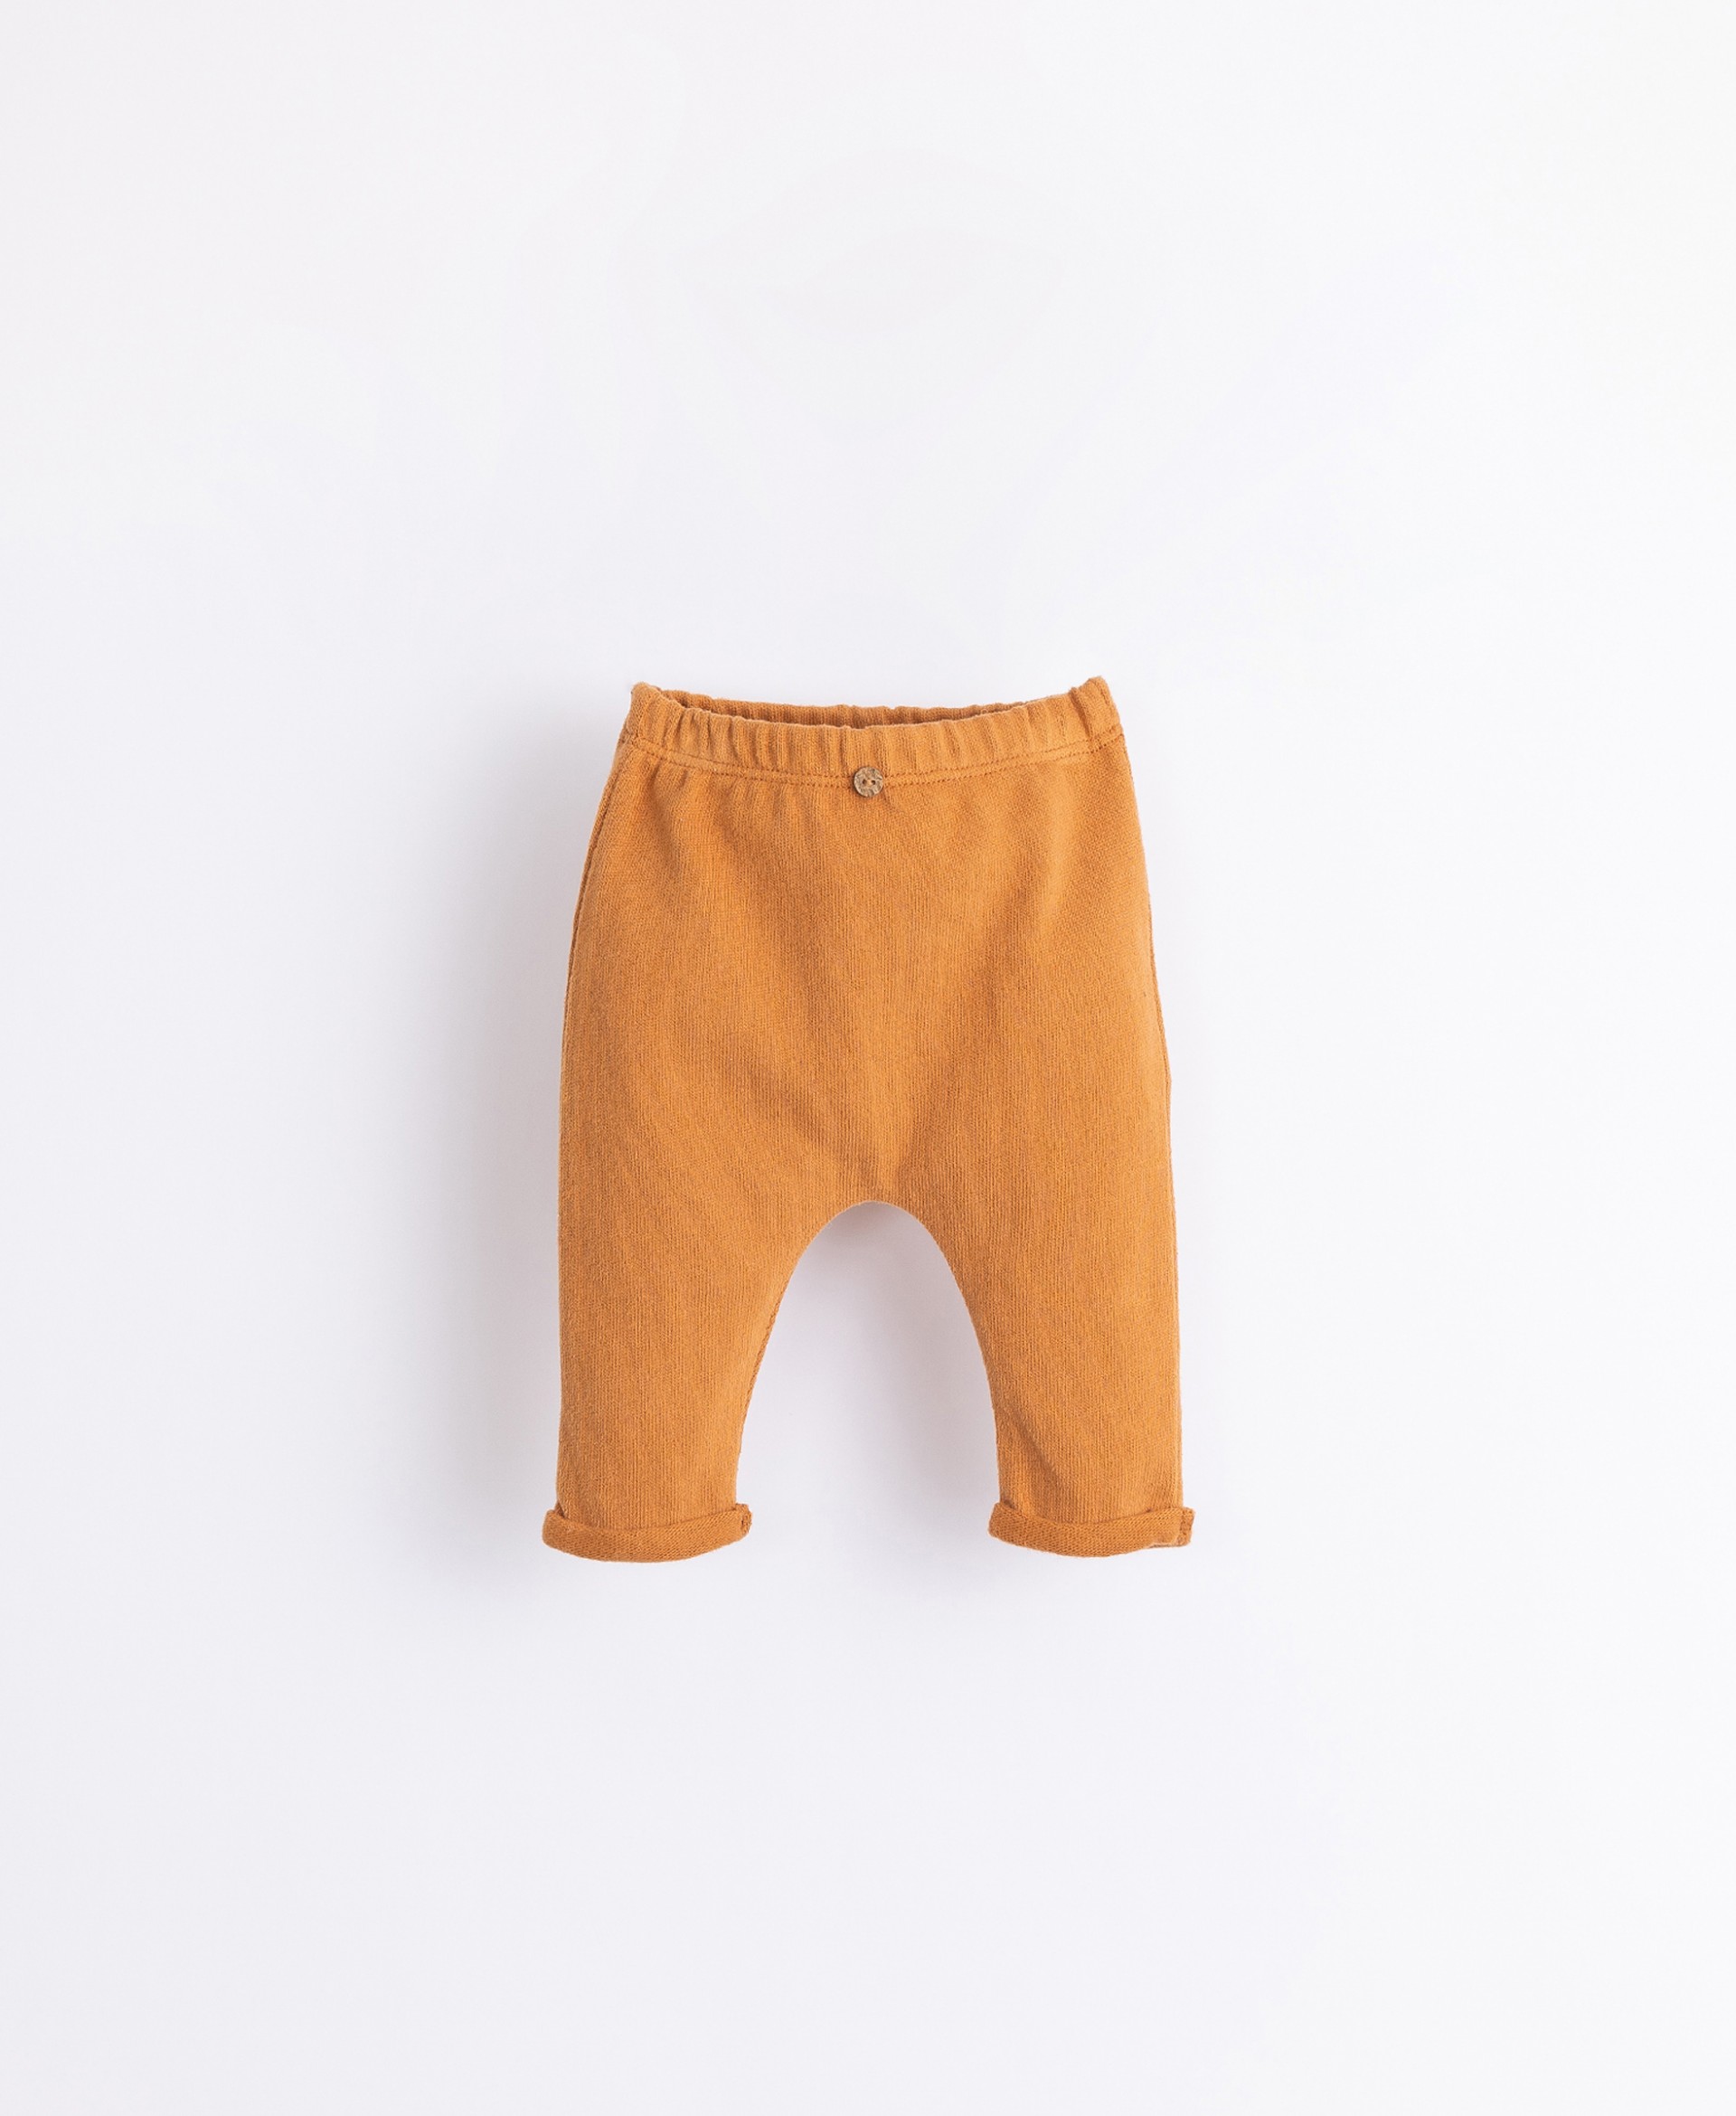 Trousers with decorative button | Illustration